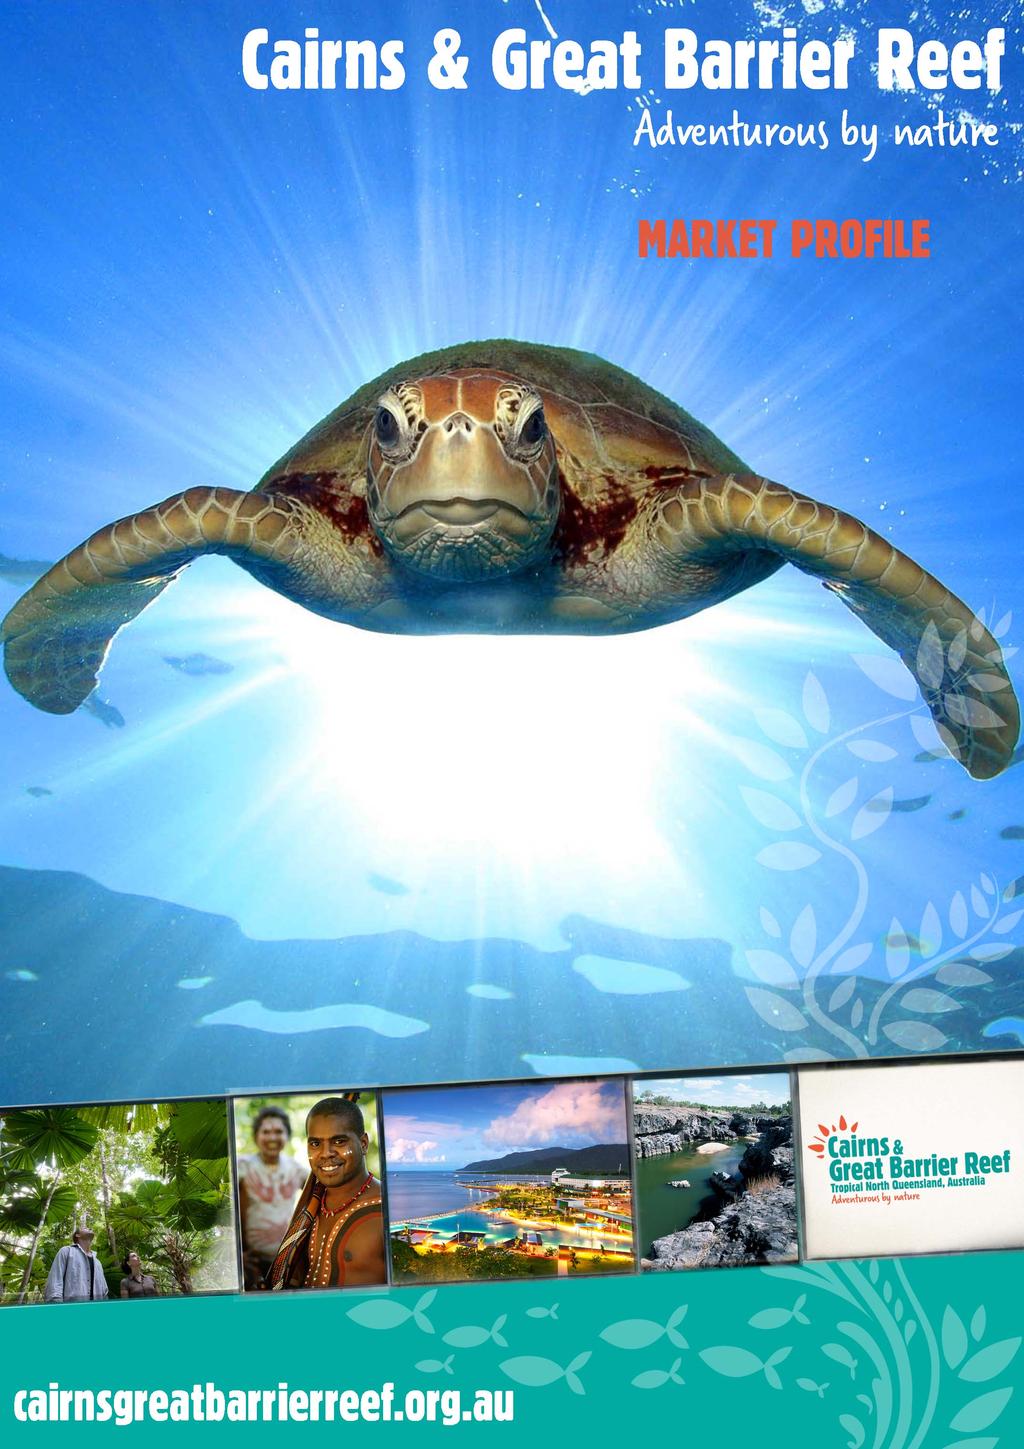 Cairns & Great Barrier Reef Adventurous by nature Updated on: Friday, 5 July 2013